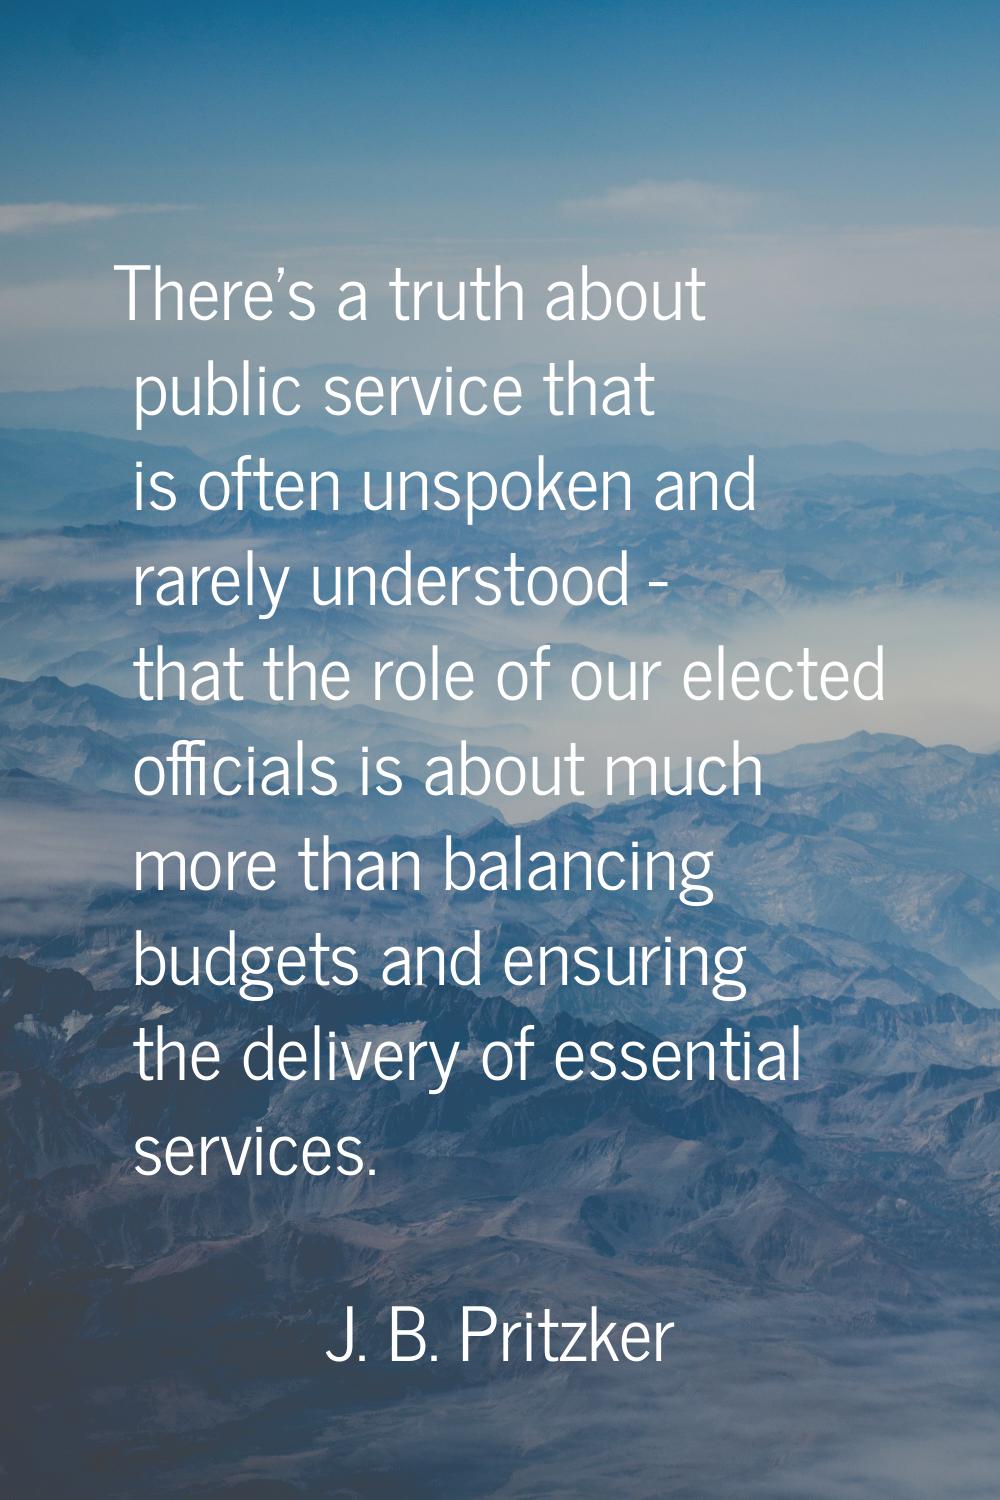 There's a truth about public service that is often unspoken and rarely understood - that the role o